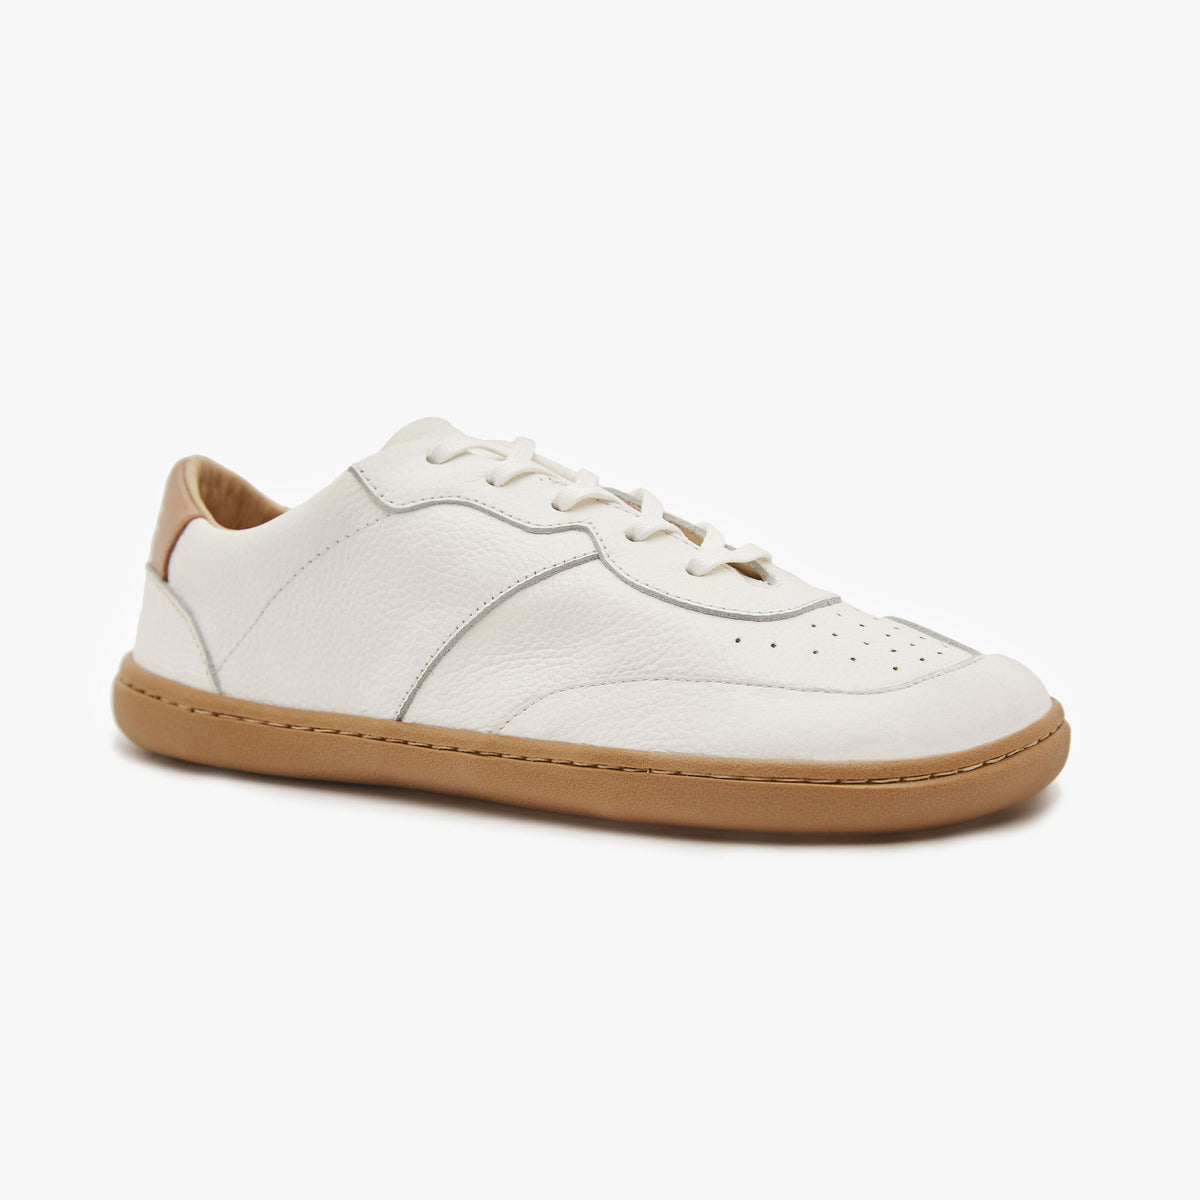 Barefoot Shoes - Women - Natural Leather - White - The Retro Sneakers ...